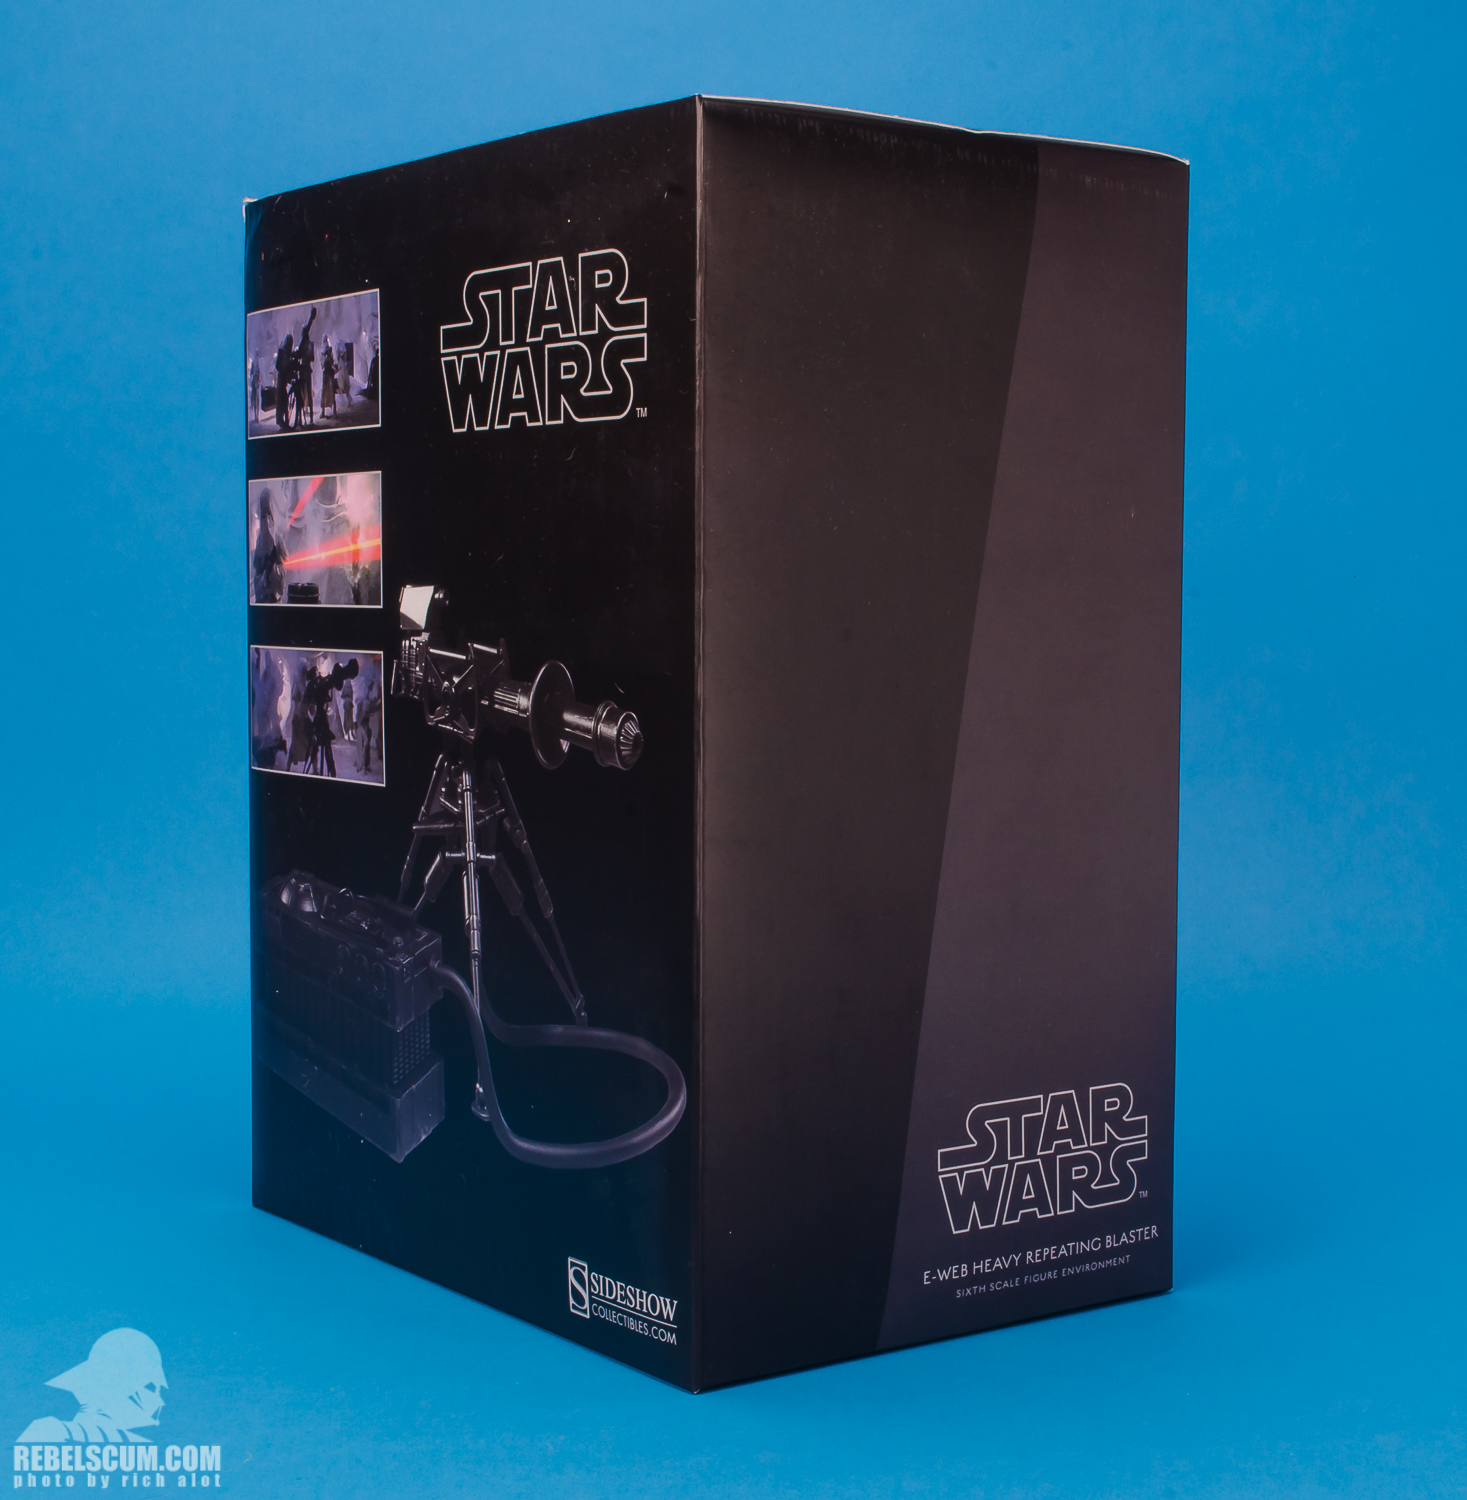 Sideshow-Collectibles-Star-Wars--Sixth-Scale-Figure-Environment-E-Web-Heavy-Repeating-Blaster-23.jpg